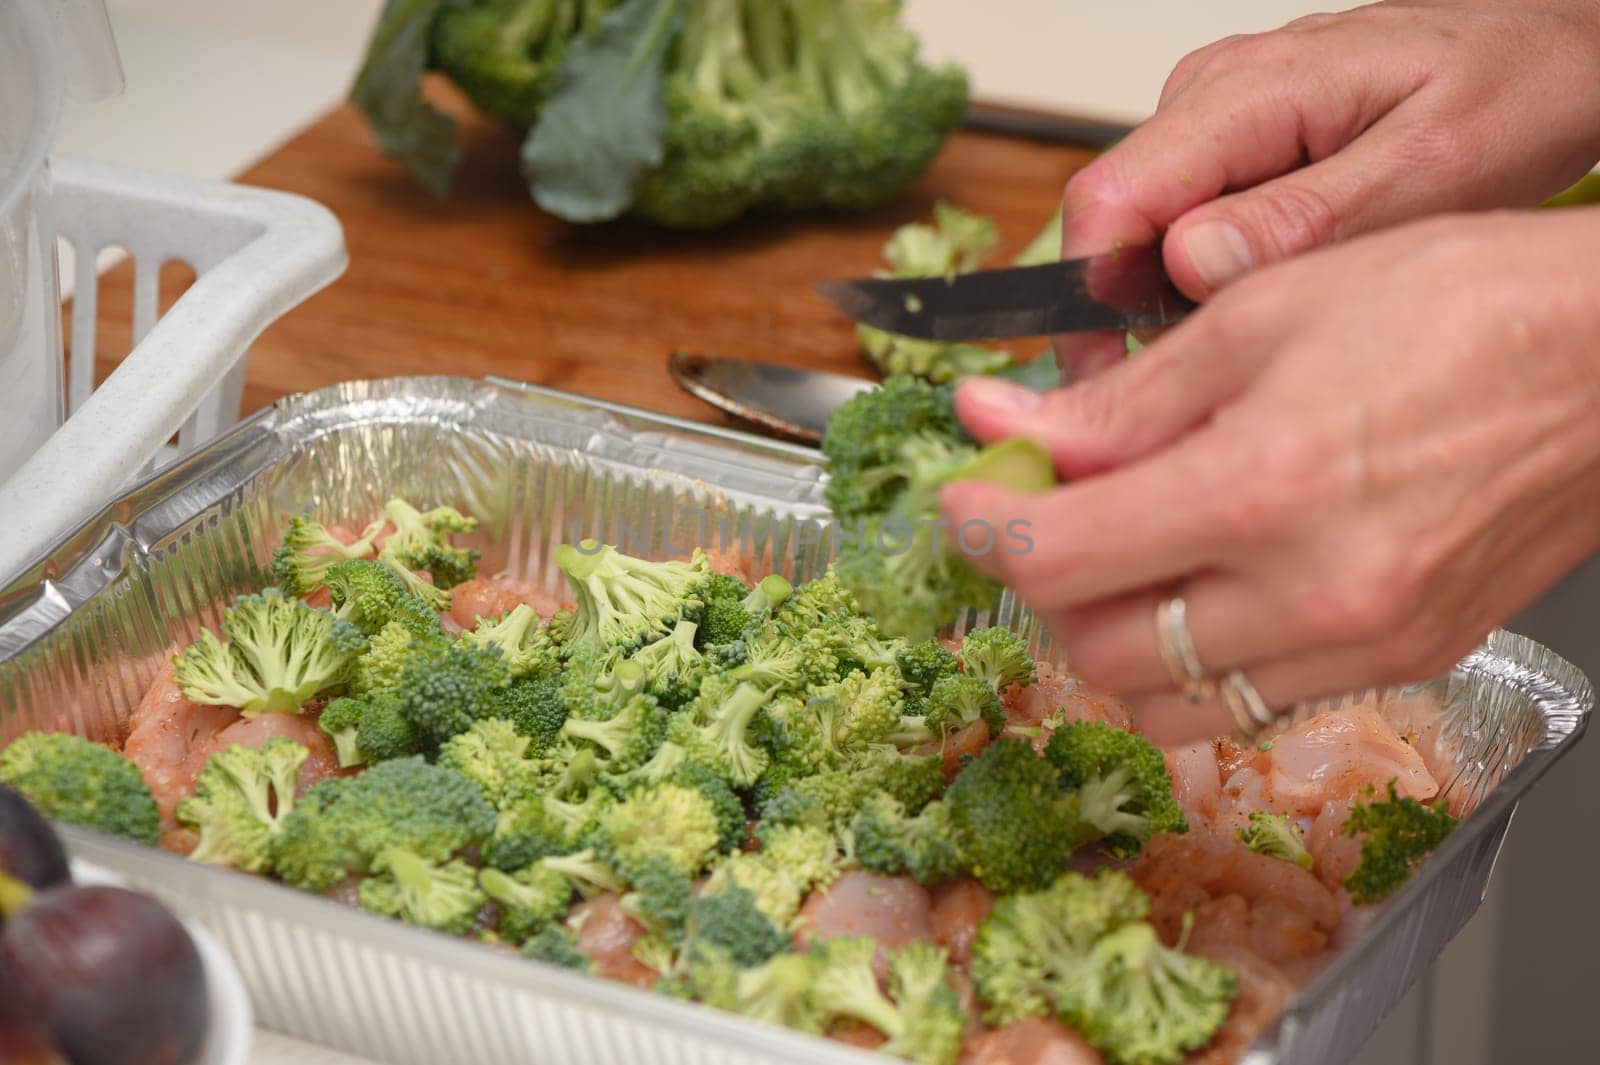 woman cutting broccoli into chicken fillet for baking 10